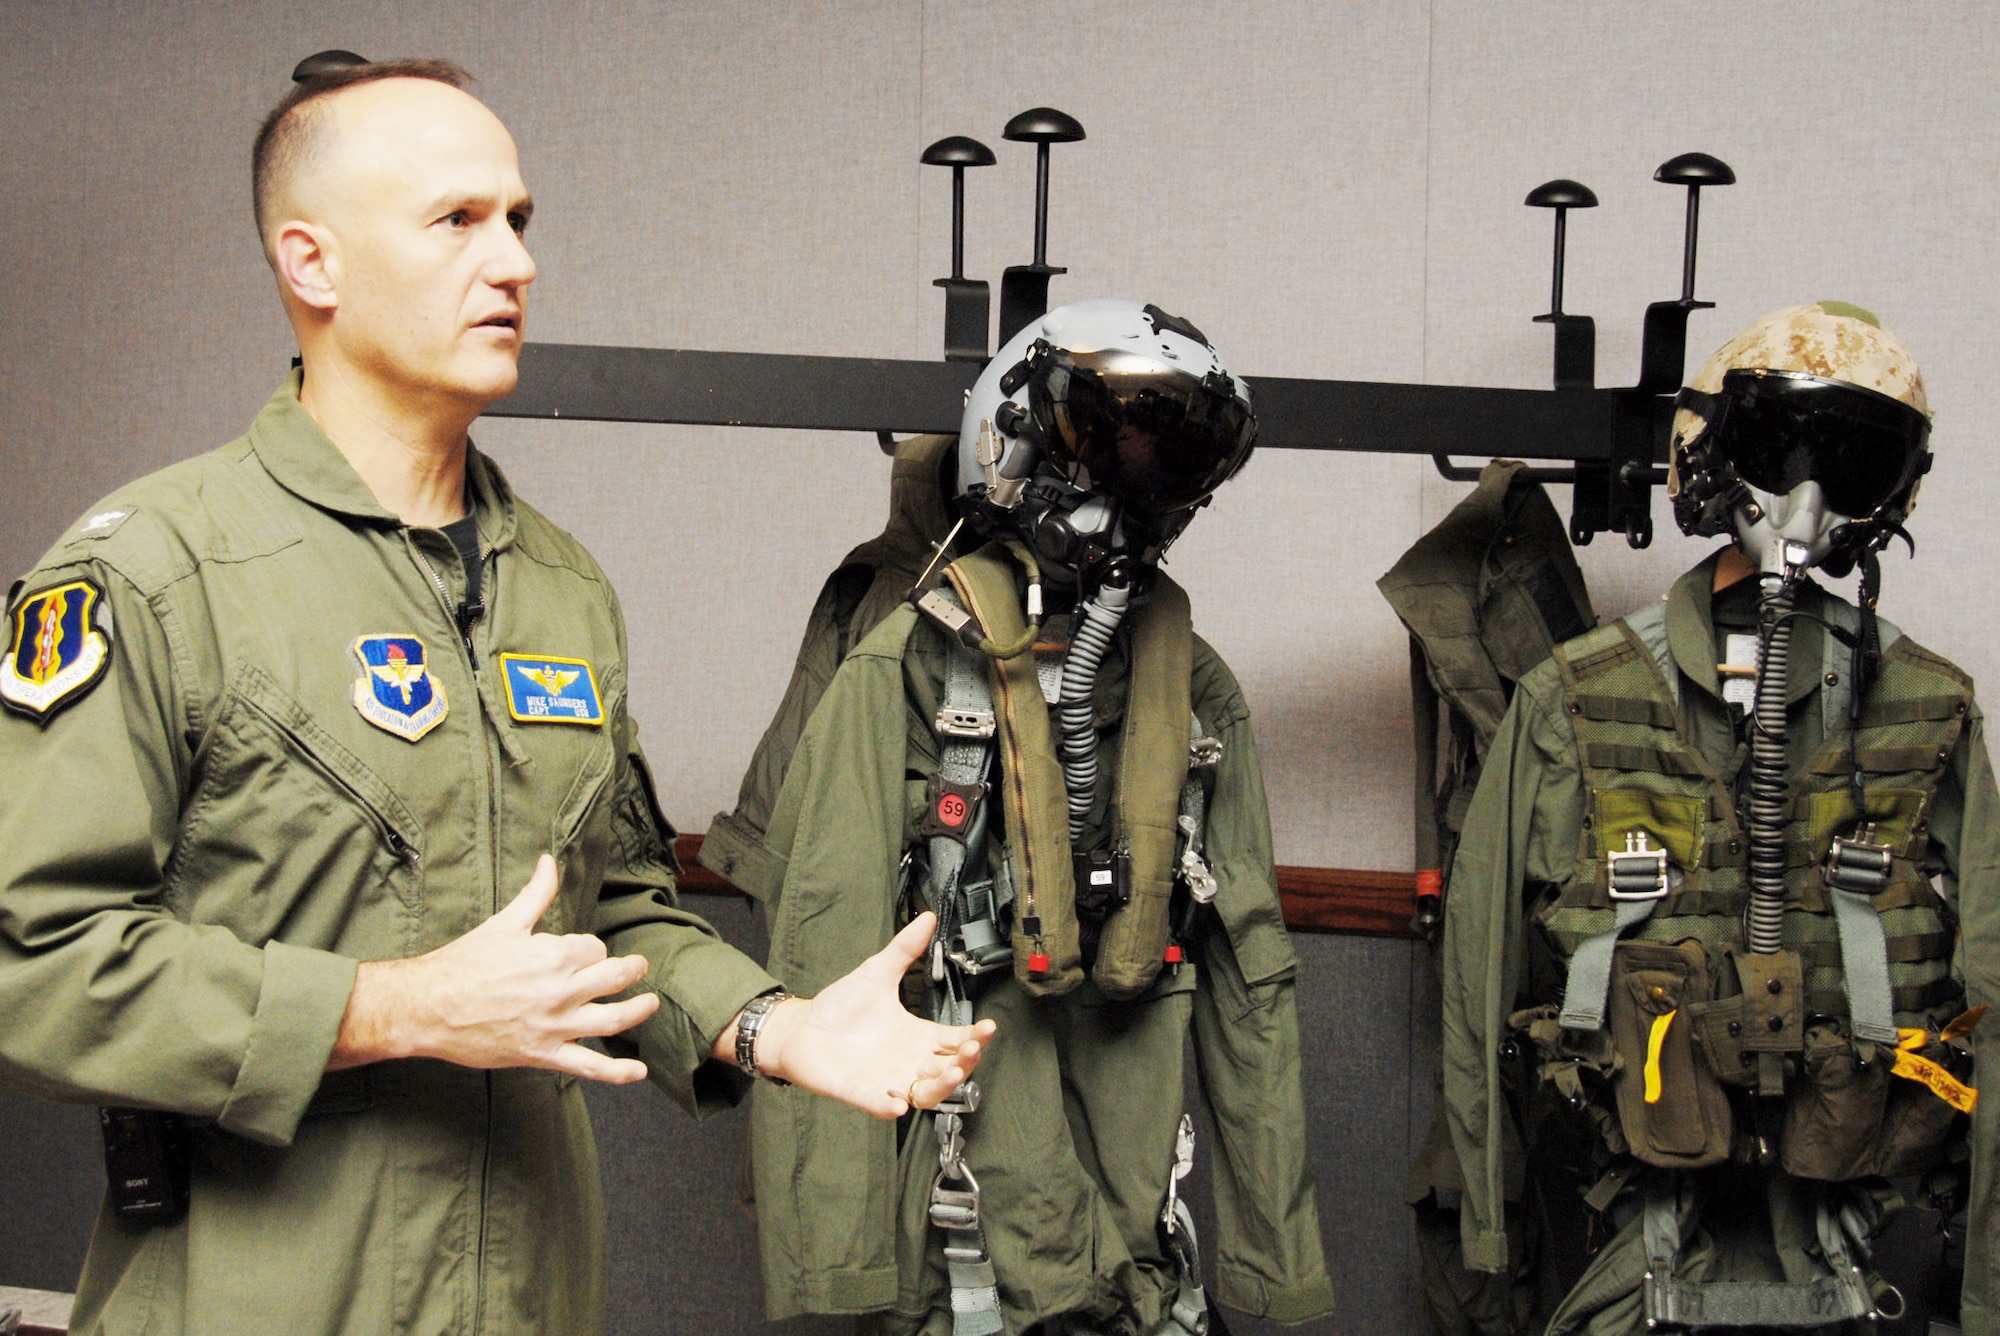 Navy Capt. Mike Saunders describes the F-35 Lightning II joint strike fighter pilot equipment after getting measured for the new suit Feb. 25, 2010, at Eglin Air Force Base, Fla. Captain Saunders is the 33rd Operations Group deputy commander. (U.S. Air Force photo/Airman 1st Class Anthony Jennings)